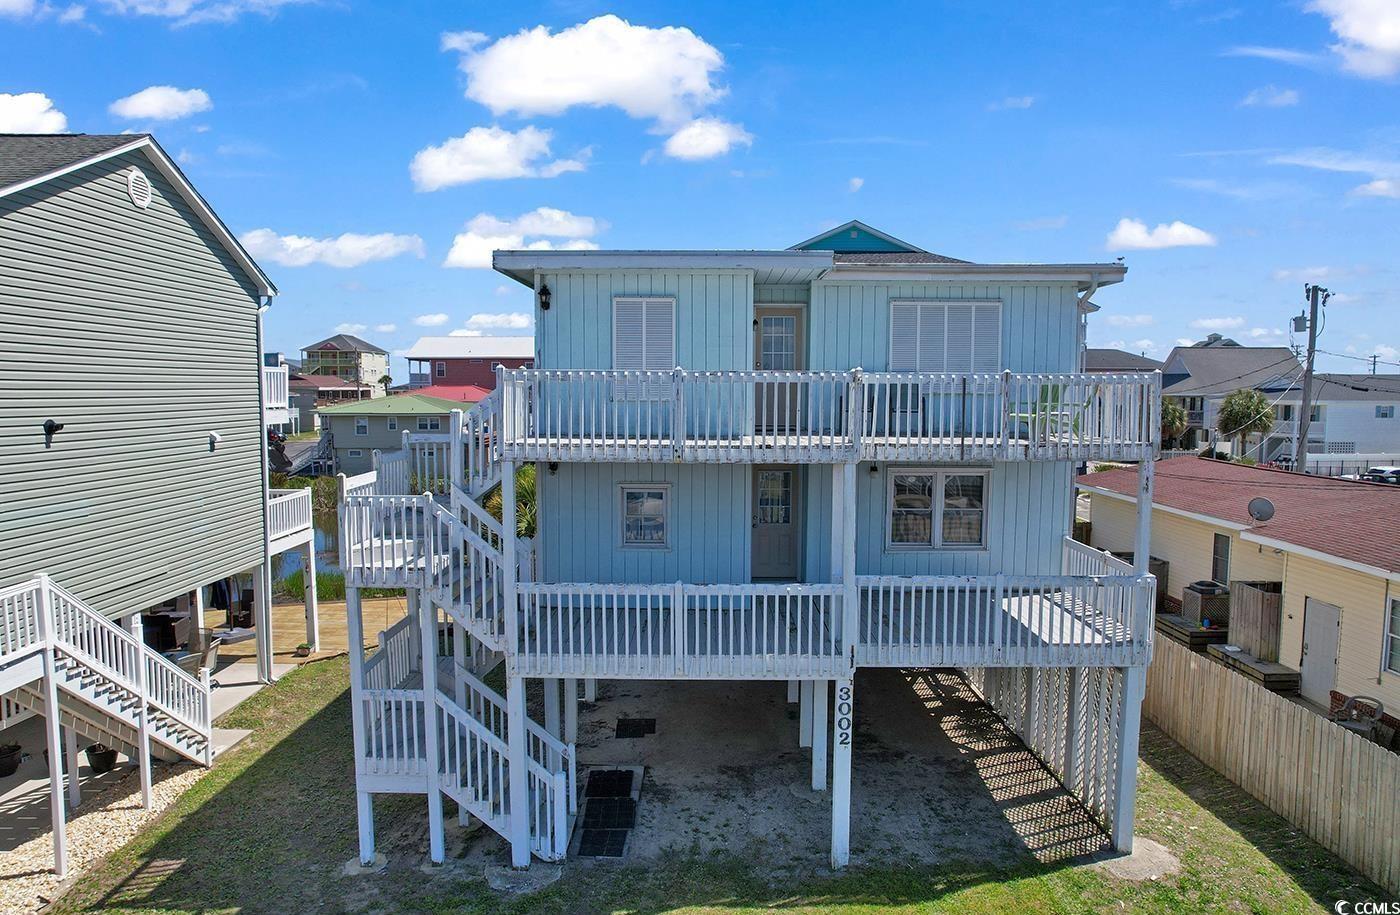 This is a great opportunity to make this diamond in the rough shine. Make this property the perfect beach get away. With the right renovations and your right personal touch this could be your get away and a great income property.  Situated just a few blocks from the Ocean in beautiful Cherry Grove North Myrtle Beach. This raised beach house offers two separate living areas both comprised of 3 bedrooms, 2 bathrooms, kitchen & living room that open on to the rear decks.  This home could possibly be converted from 2 units into one or keep it as is & use one as your second home while having a rental income. The property is located on the lake and short walk to the beach. The property is centrally located and close to all the amenities that Cherry Grove offers, great beaches, restaurant, local pubs and shopping, offering the best of what Coastal South Carolina is all about. So, if you're looking for your next vacation home, investment property, or primary residence this could be the one.